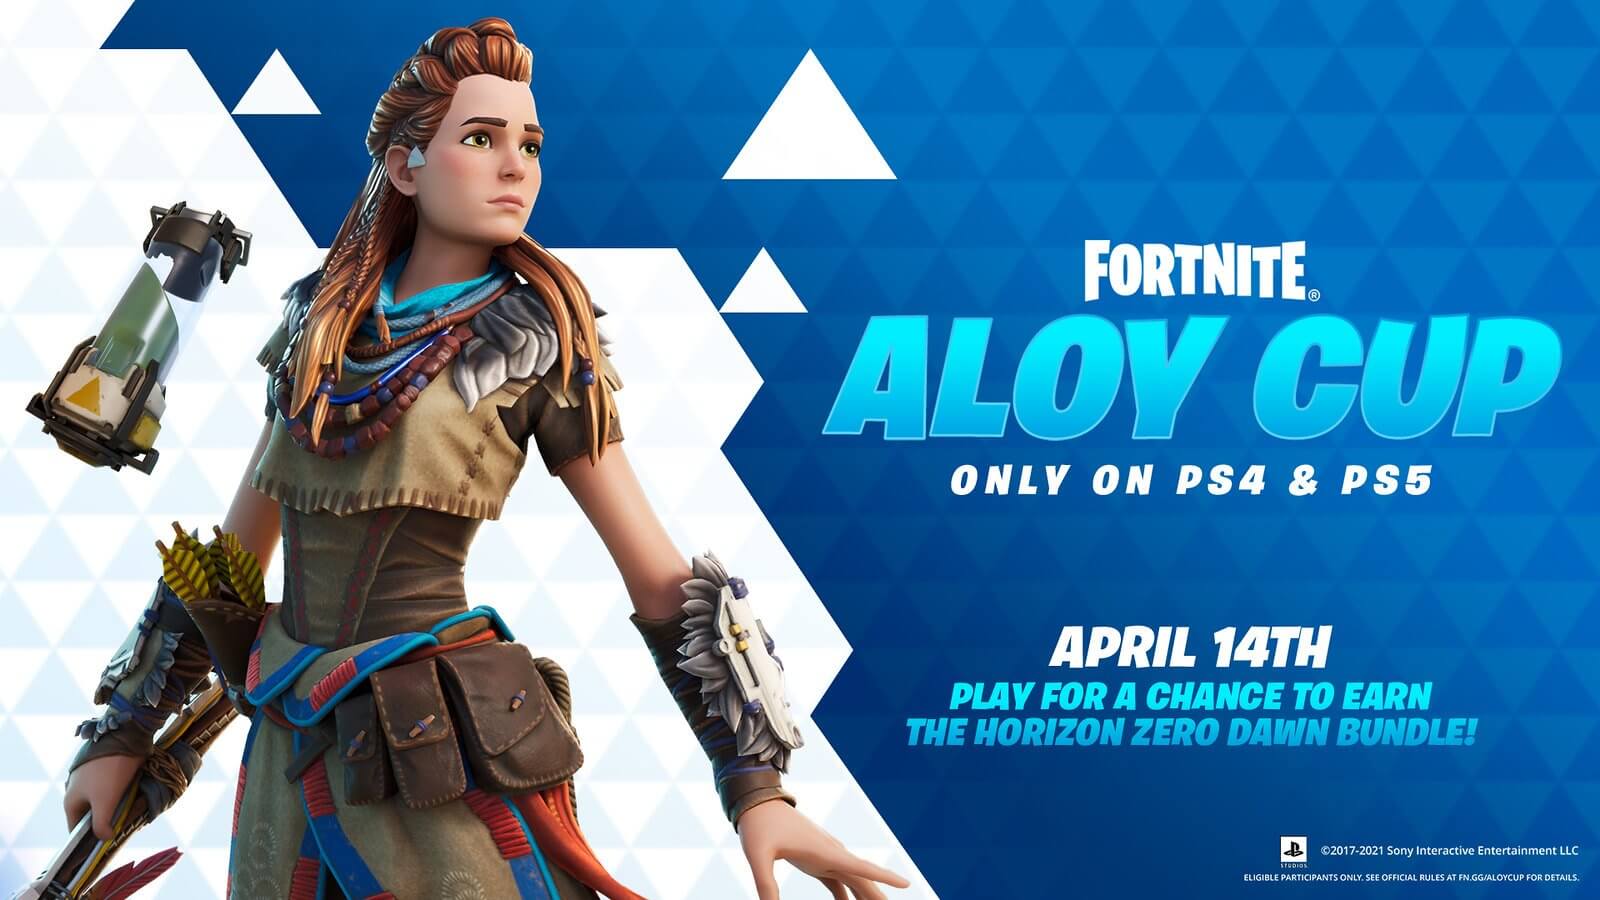 Fortnite Aloy Cup PlayStation